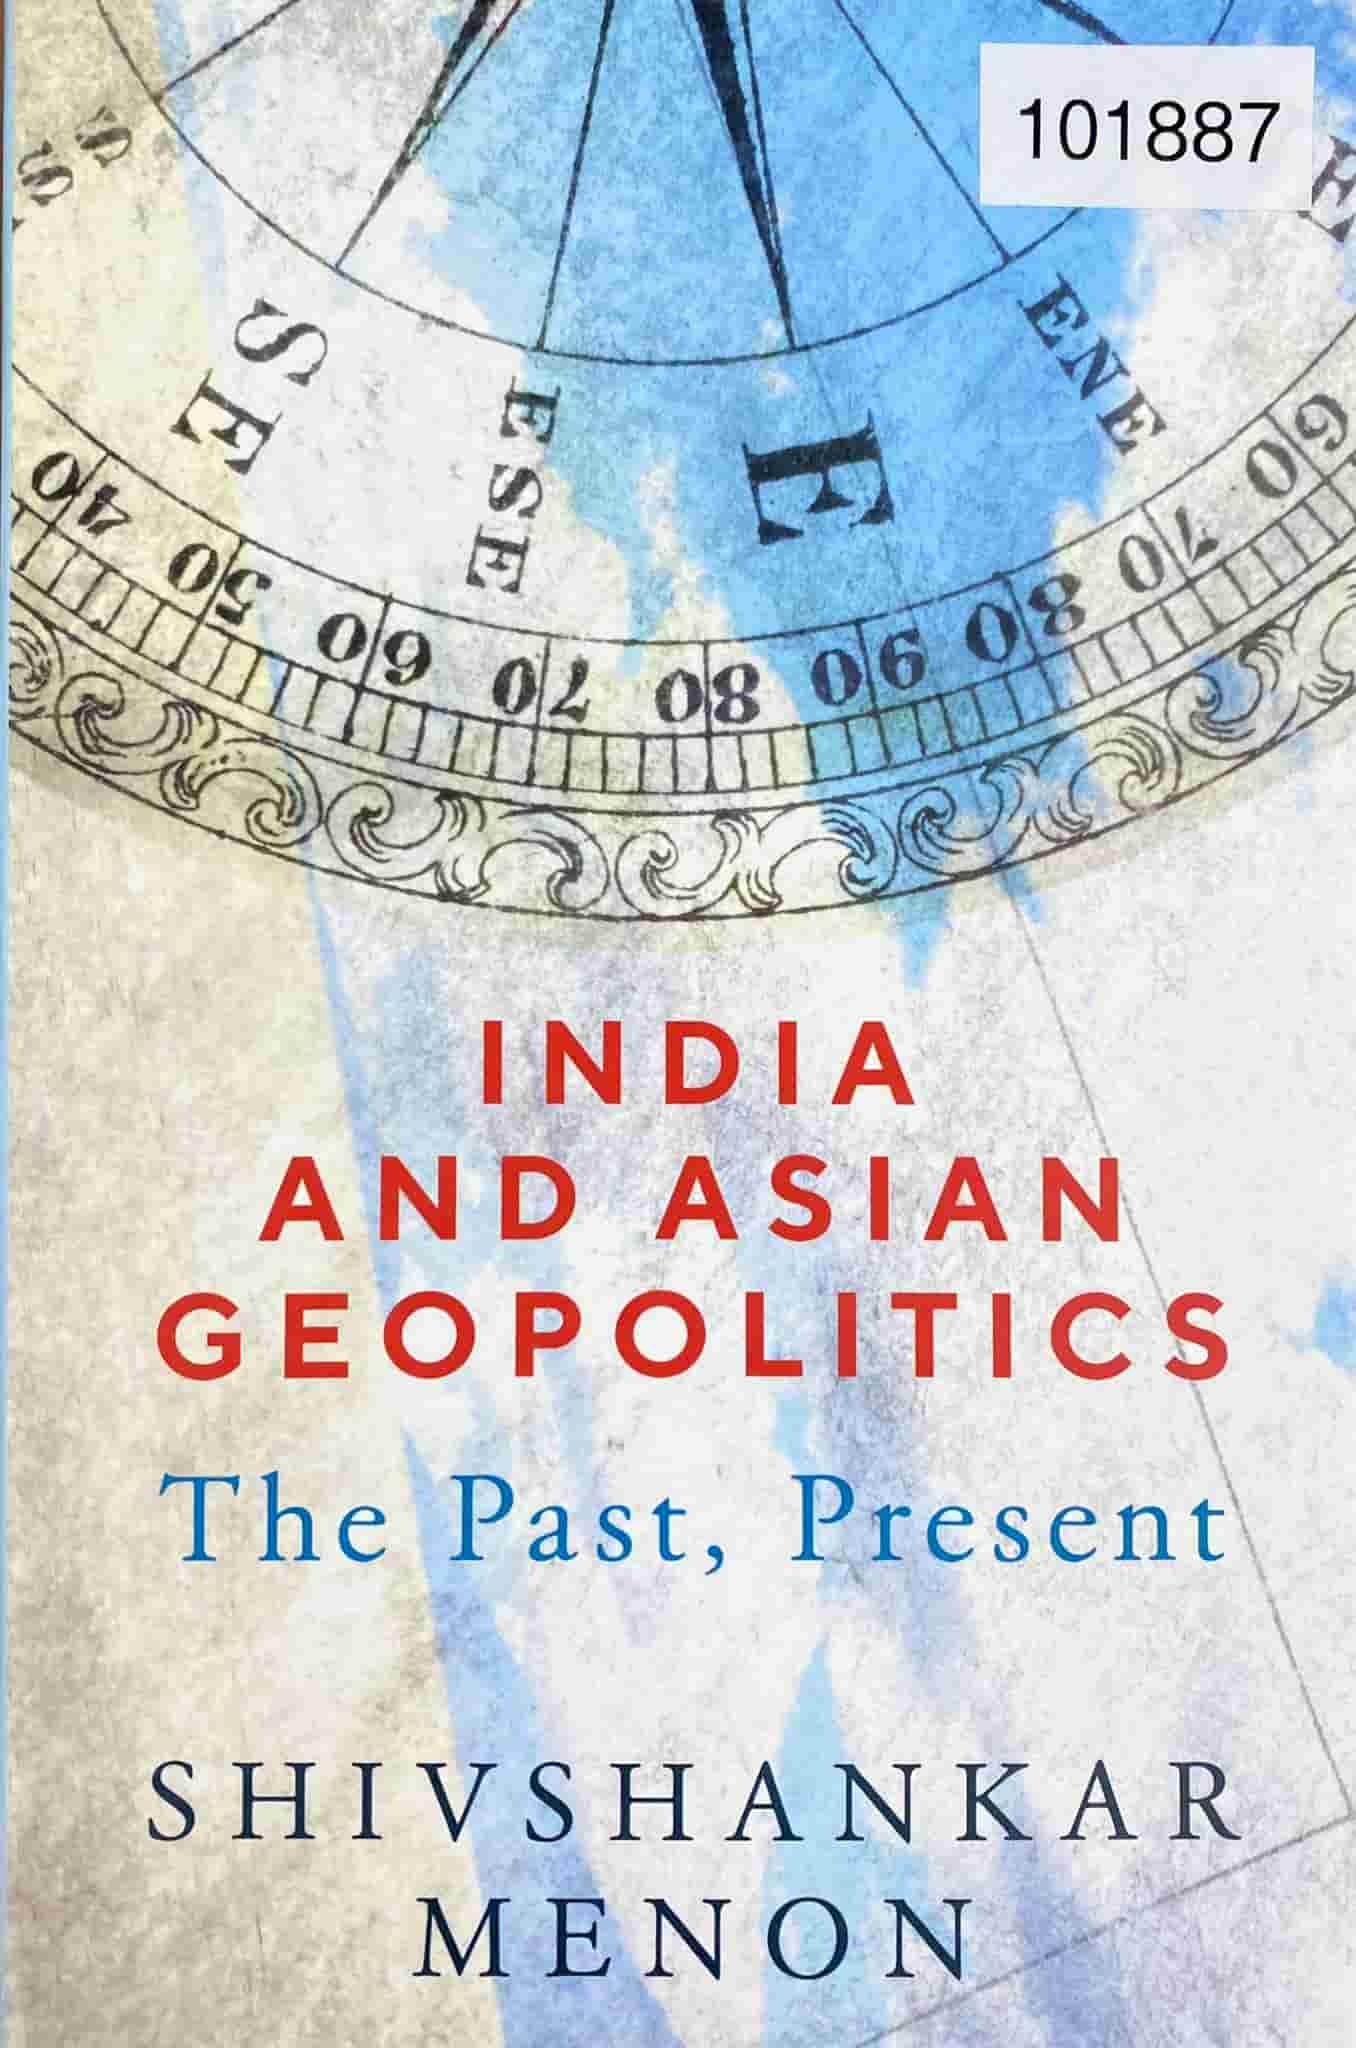 Recommended book: India and Asian Geopolitics: The Past, Present 